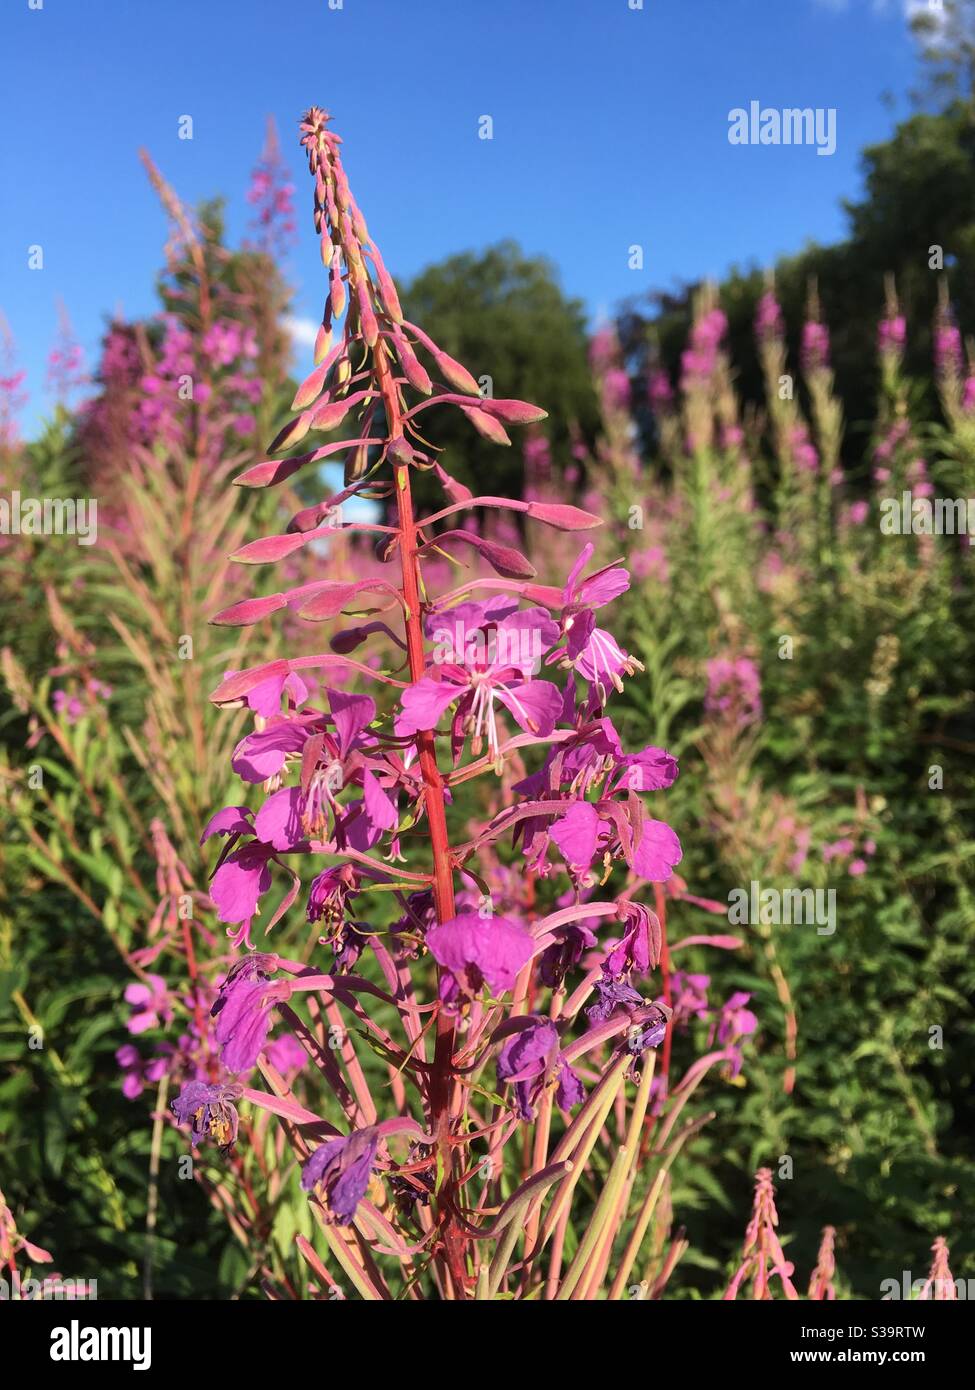 The pink flowers of wild Fireweed (Rosebay Willowherb) plants in a summer meadow Stock Photo